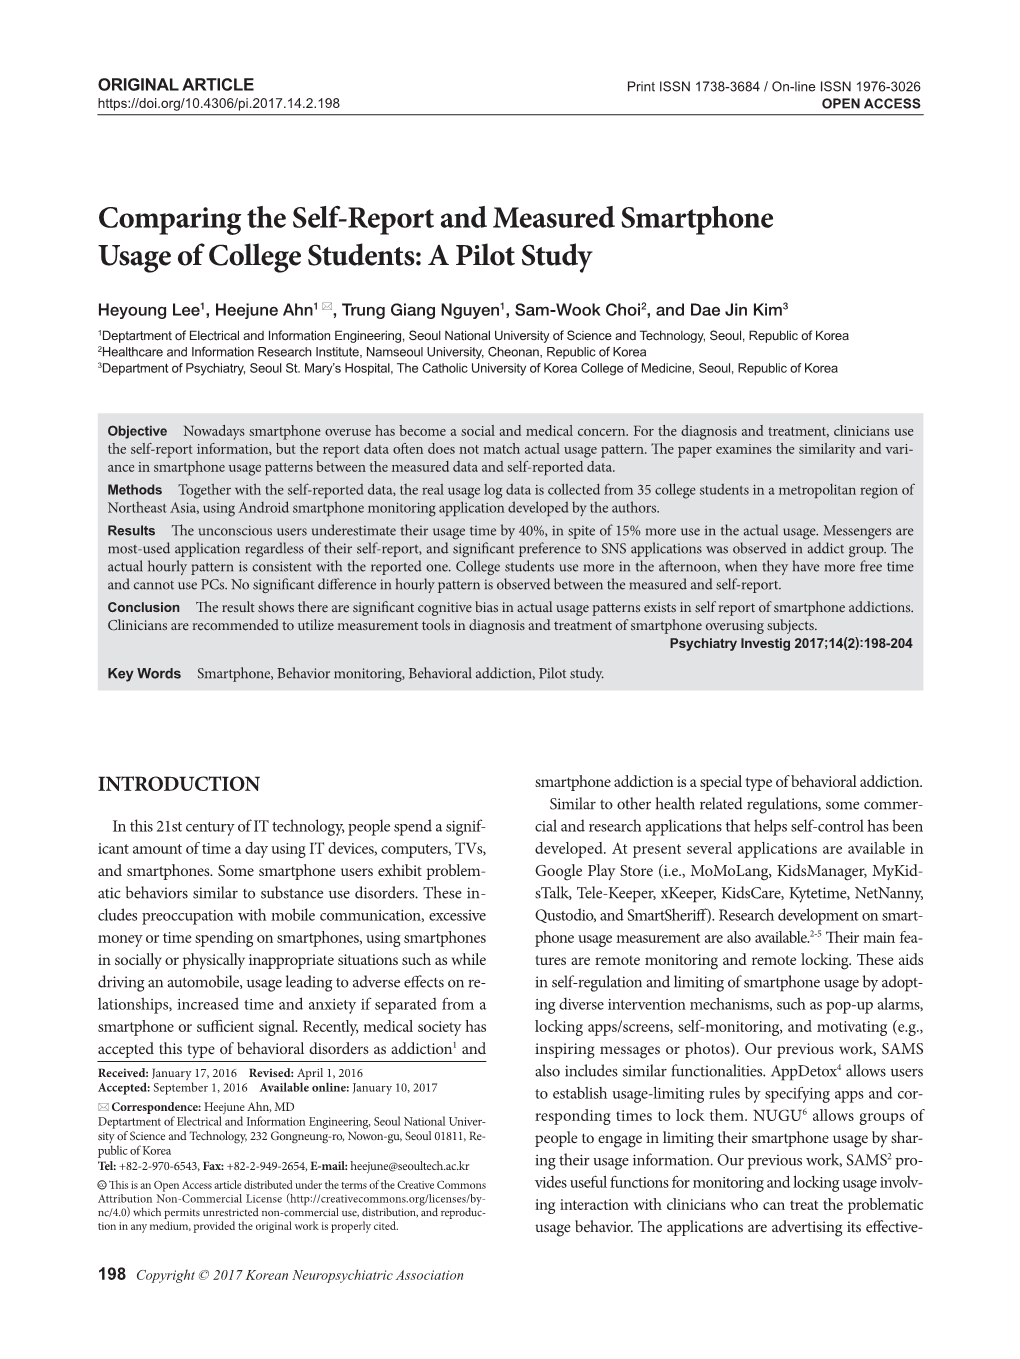 Comparing the Self-Report and Measured Smartphone Usage of College Students: a Pilot Study